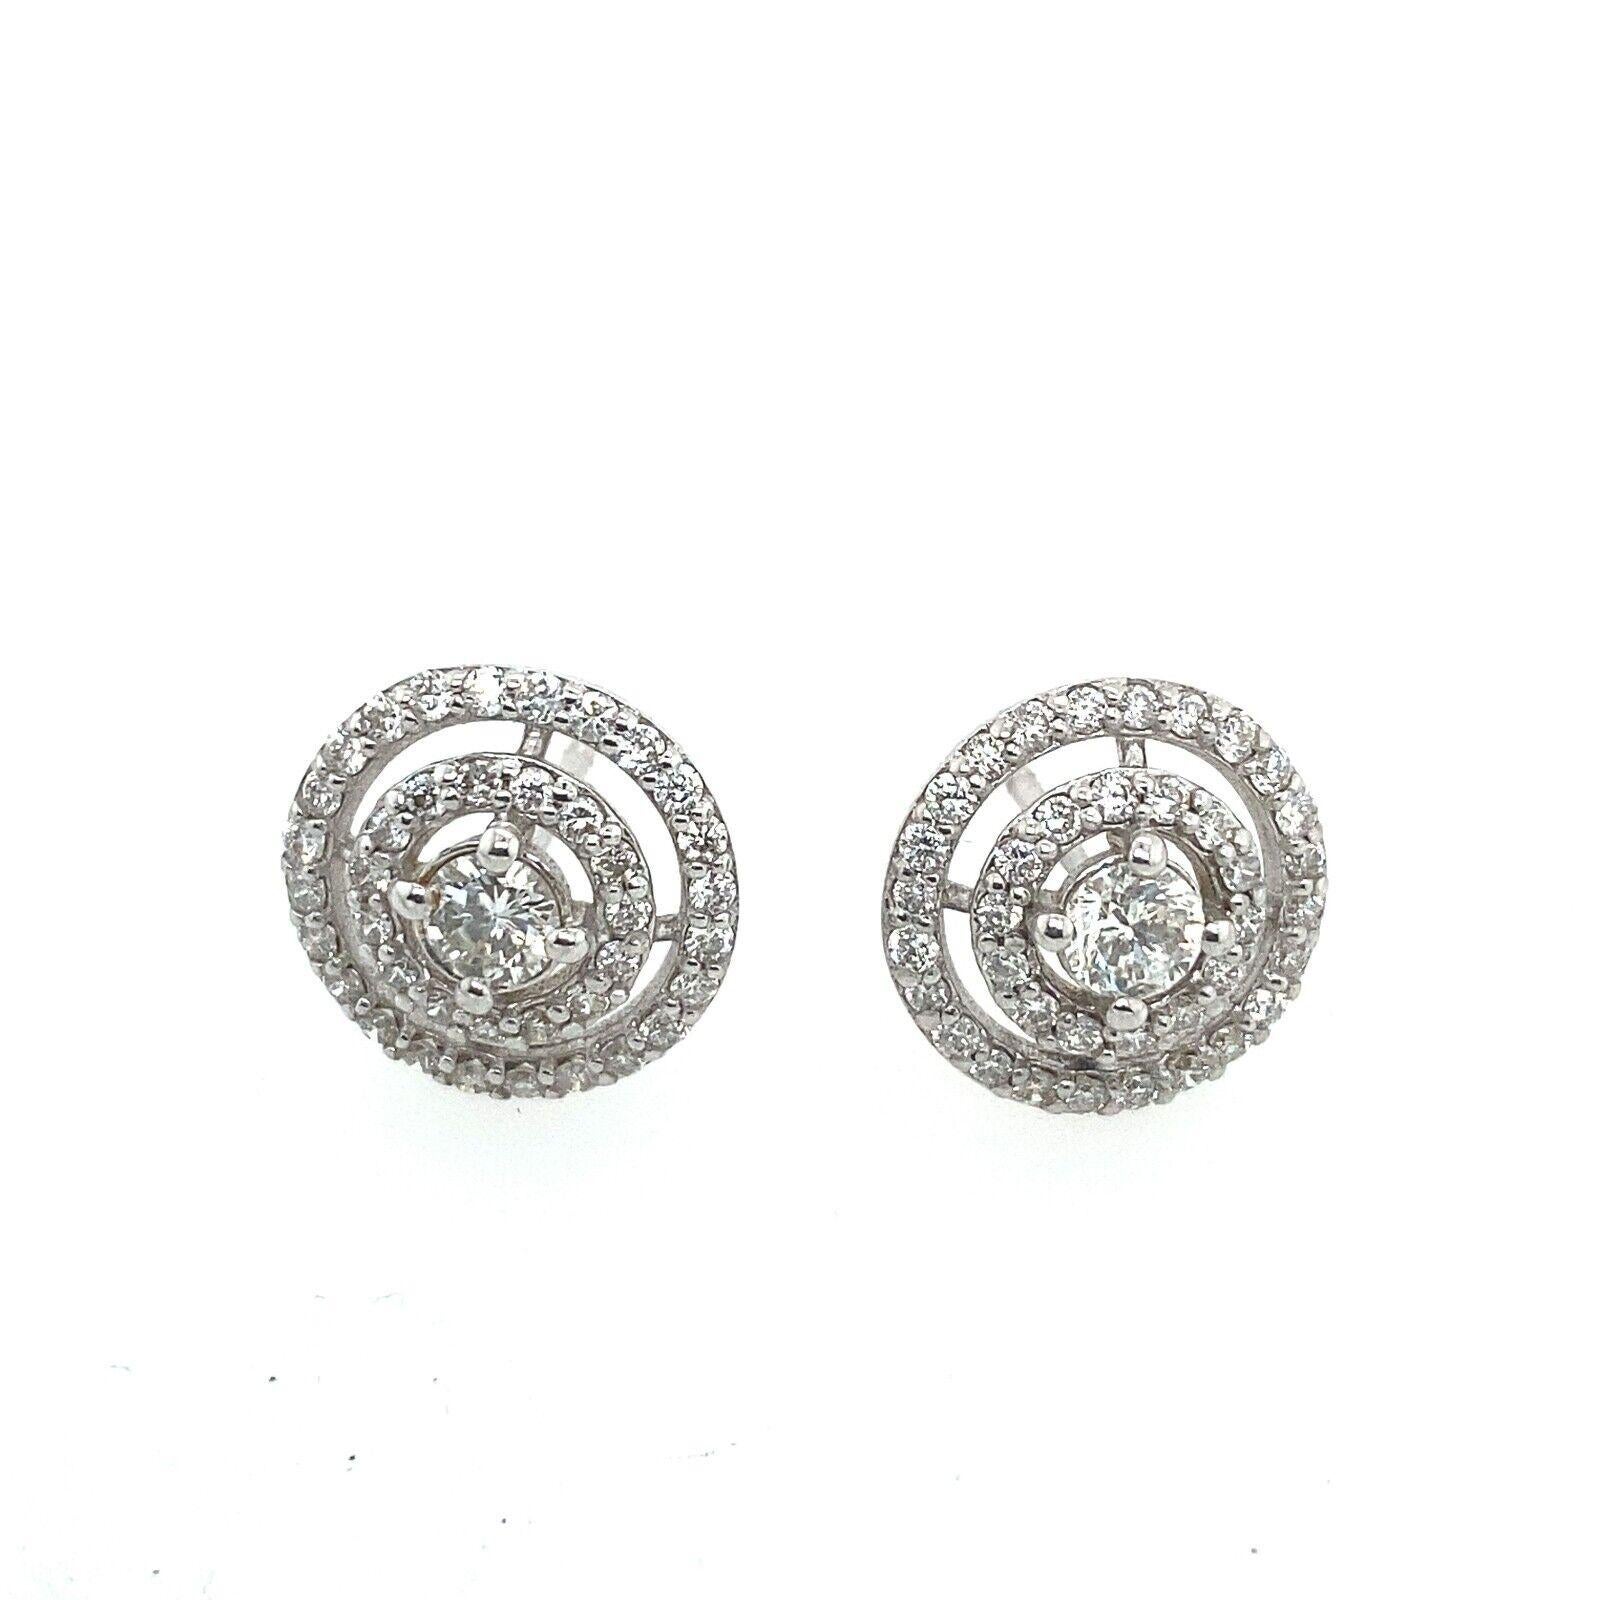 0.75ct 2 Row Pave Set Round Diamond Earrings in 18ct White Gold